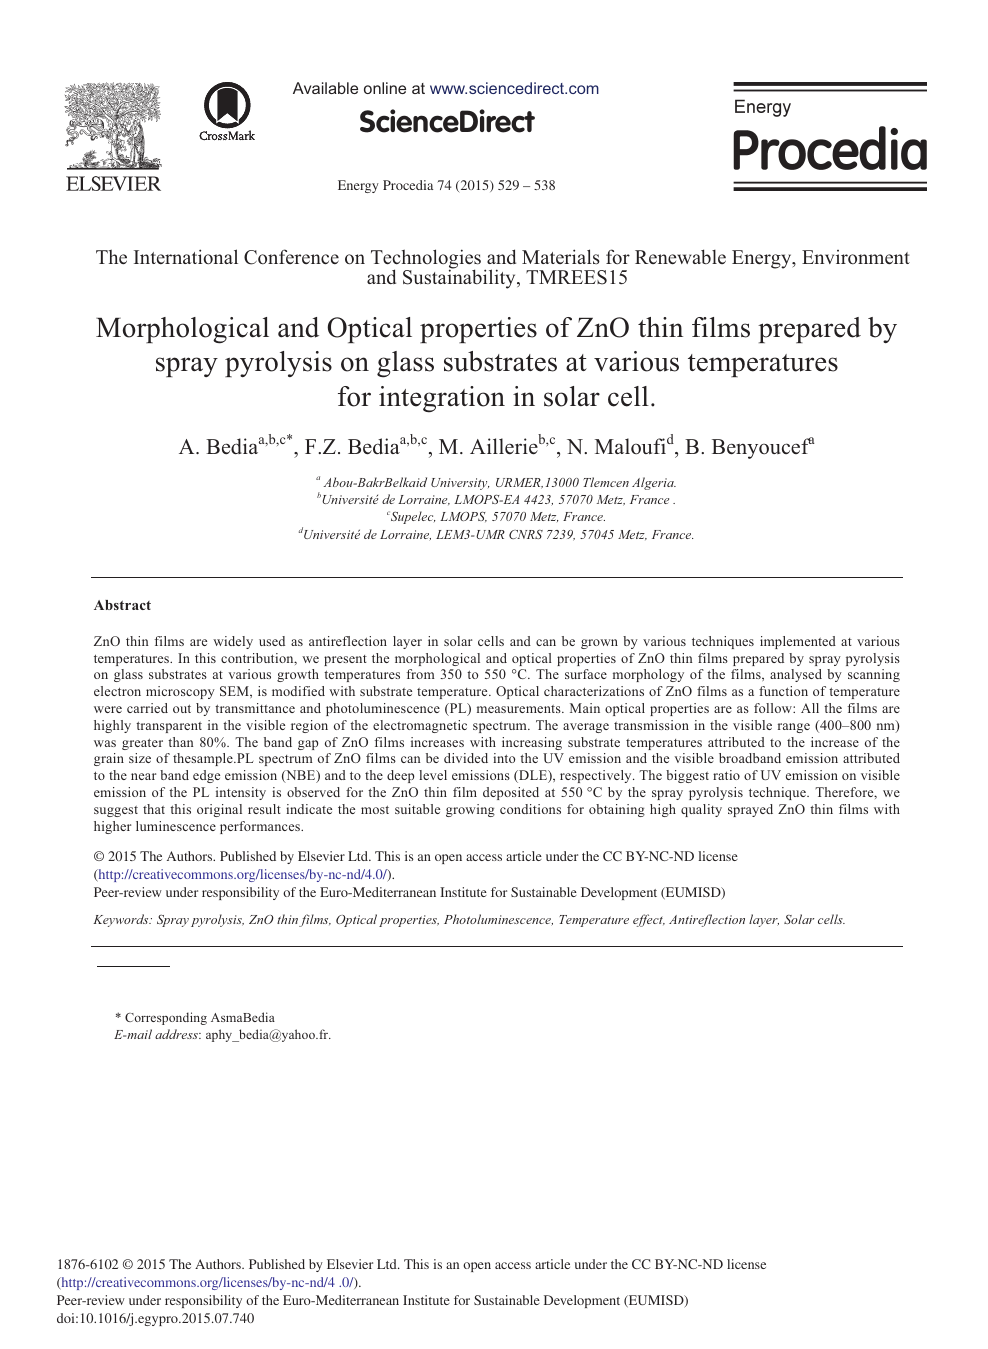 Morphological And Optical Properties Of Zno Thin Films Prepared By Spray Pyrolysis On Glass Substrates At Various Temperatures For Integration In Solar Cell Topic Of Research Paper In Materials Engineering Download